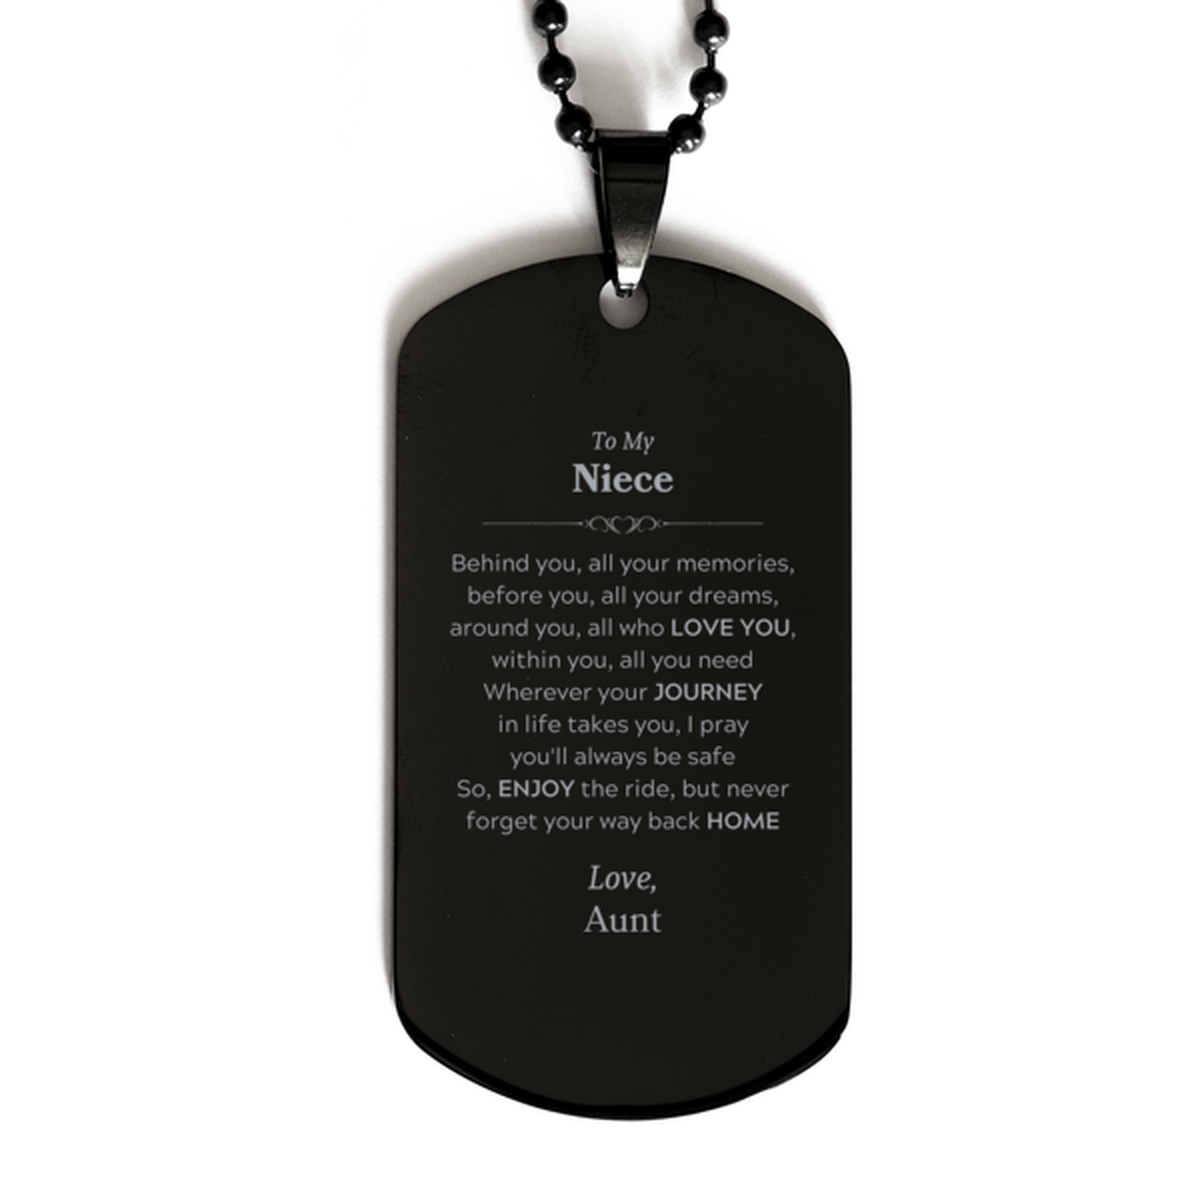 To My Niece Graduation Gifts from Aunt, Niece Black Dog Tag Christmas Birthday Gifts for Niece Behind you, all your memories, before you, all your dreams. Love, Aunt